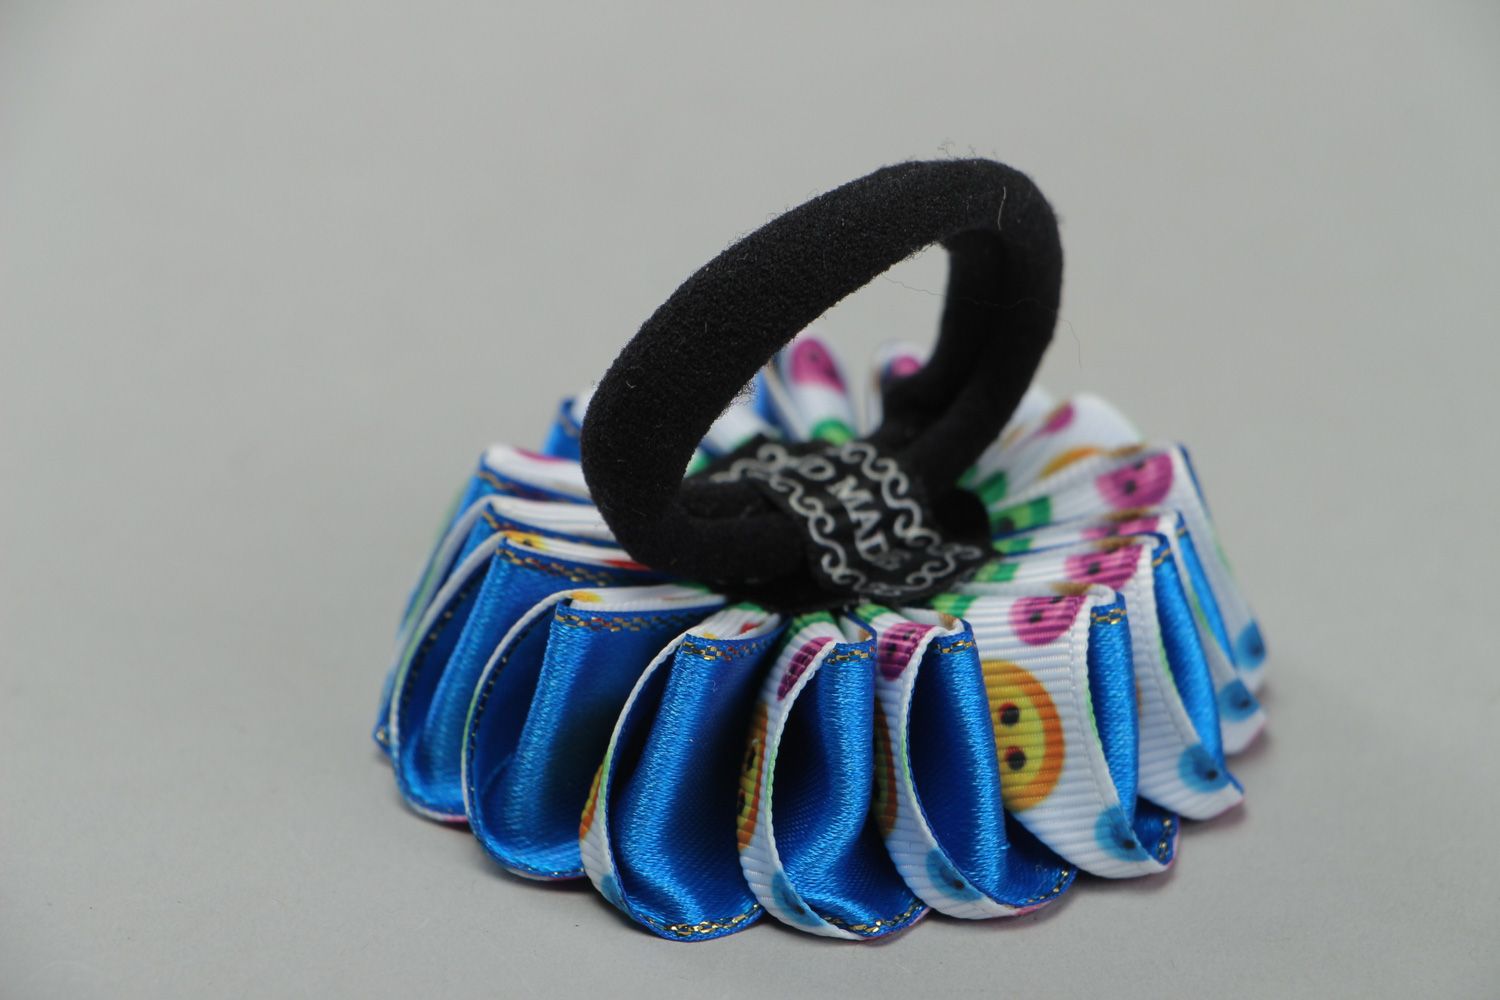 Handmade motley hair tie with volume kanzashi flower made of rep and satin ribbons photo 3